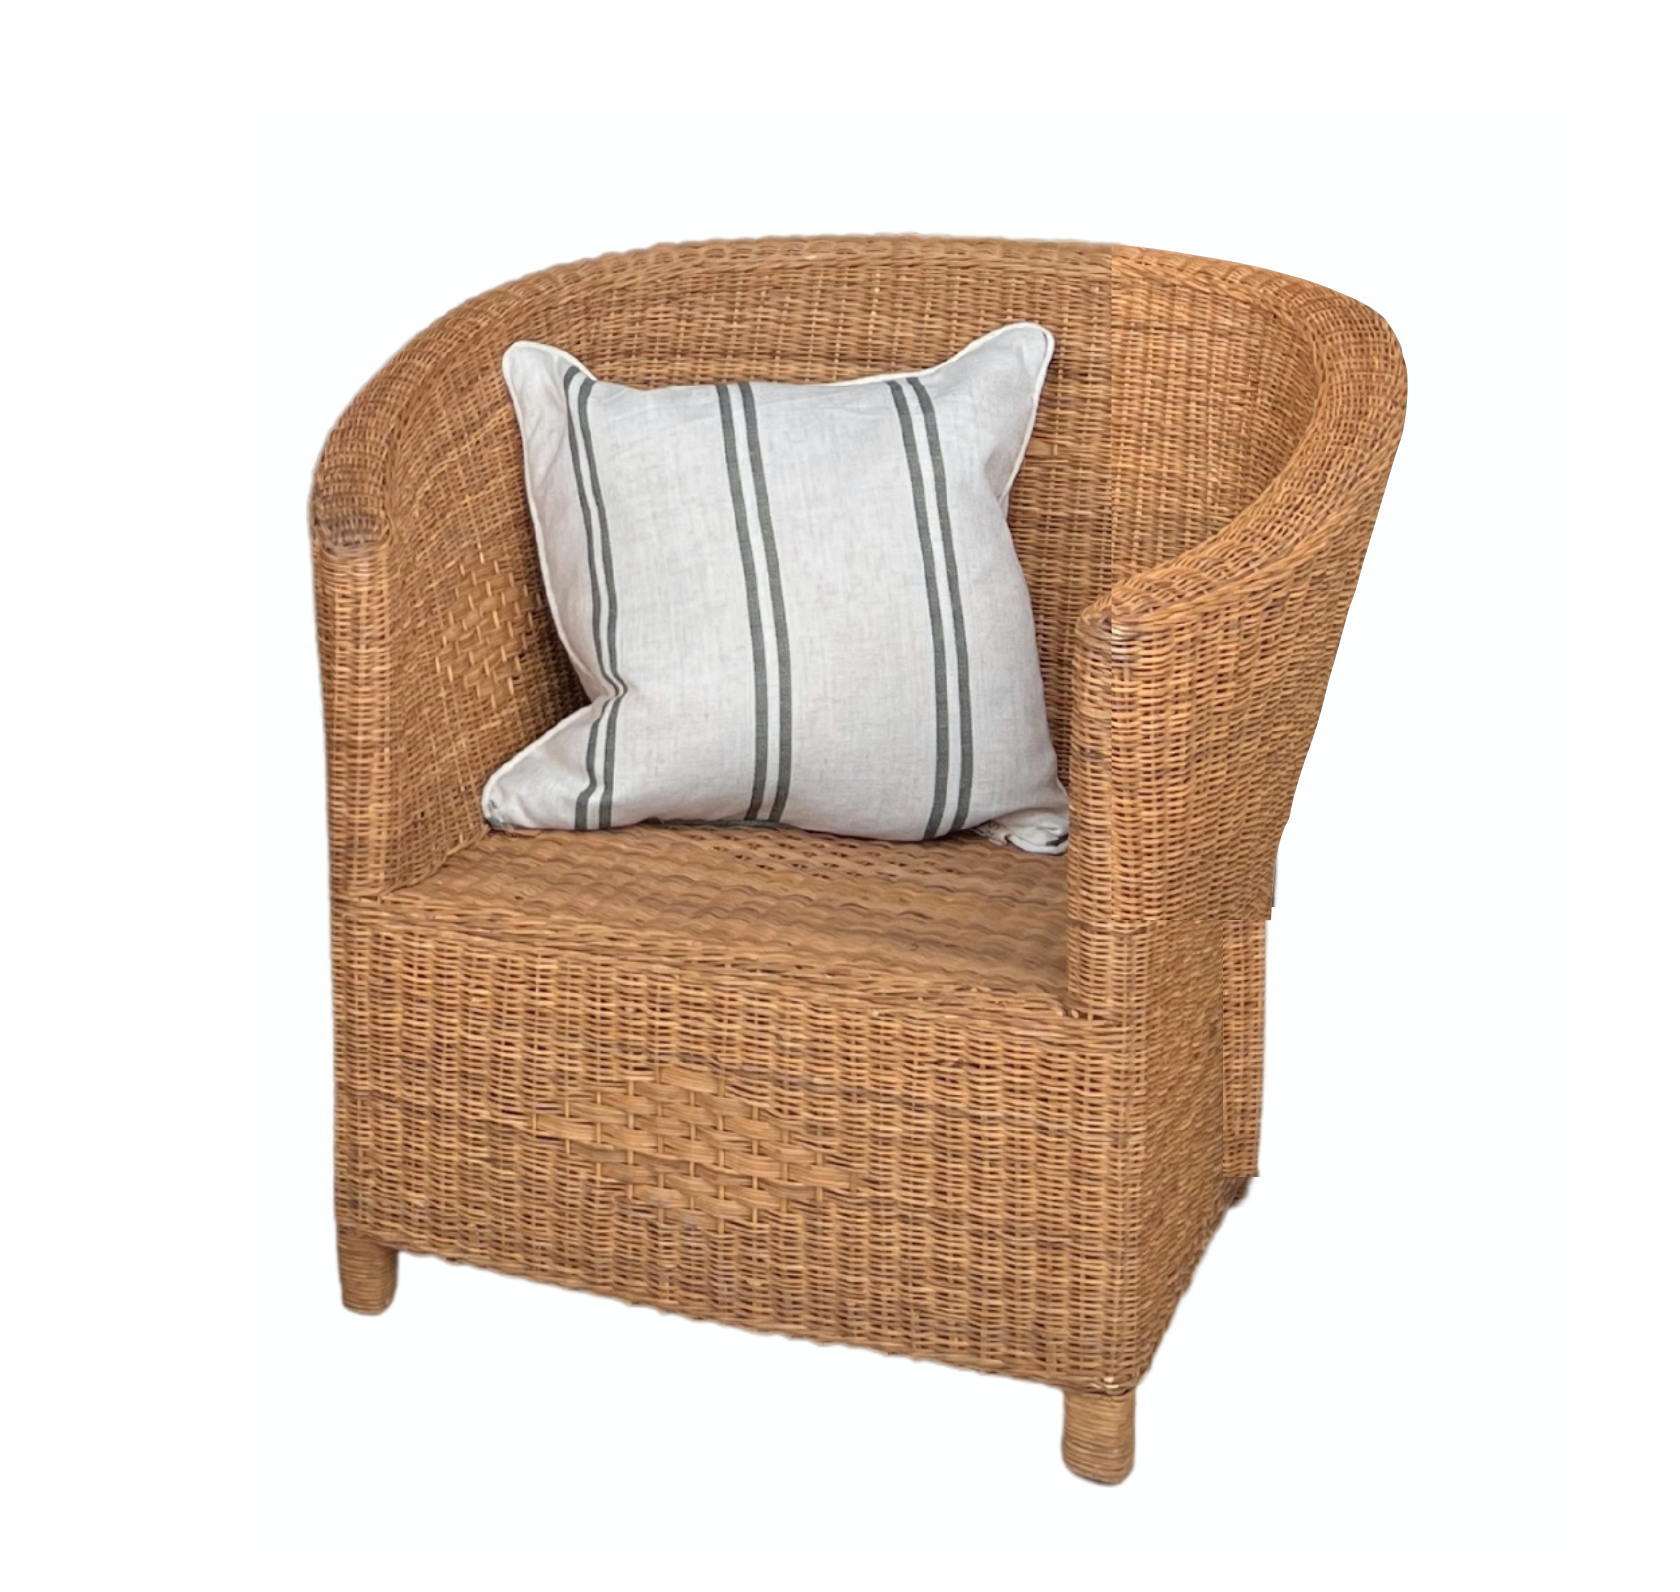 Club Woven Cane Chair - Limited Edition